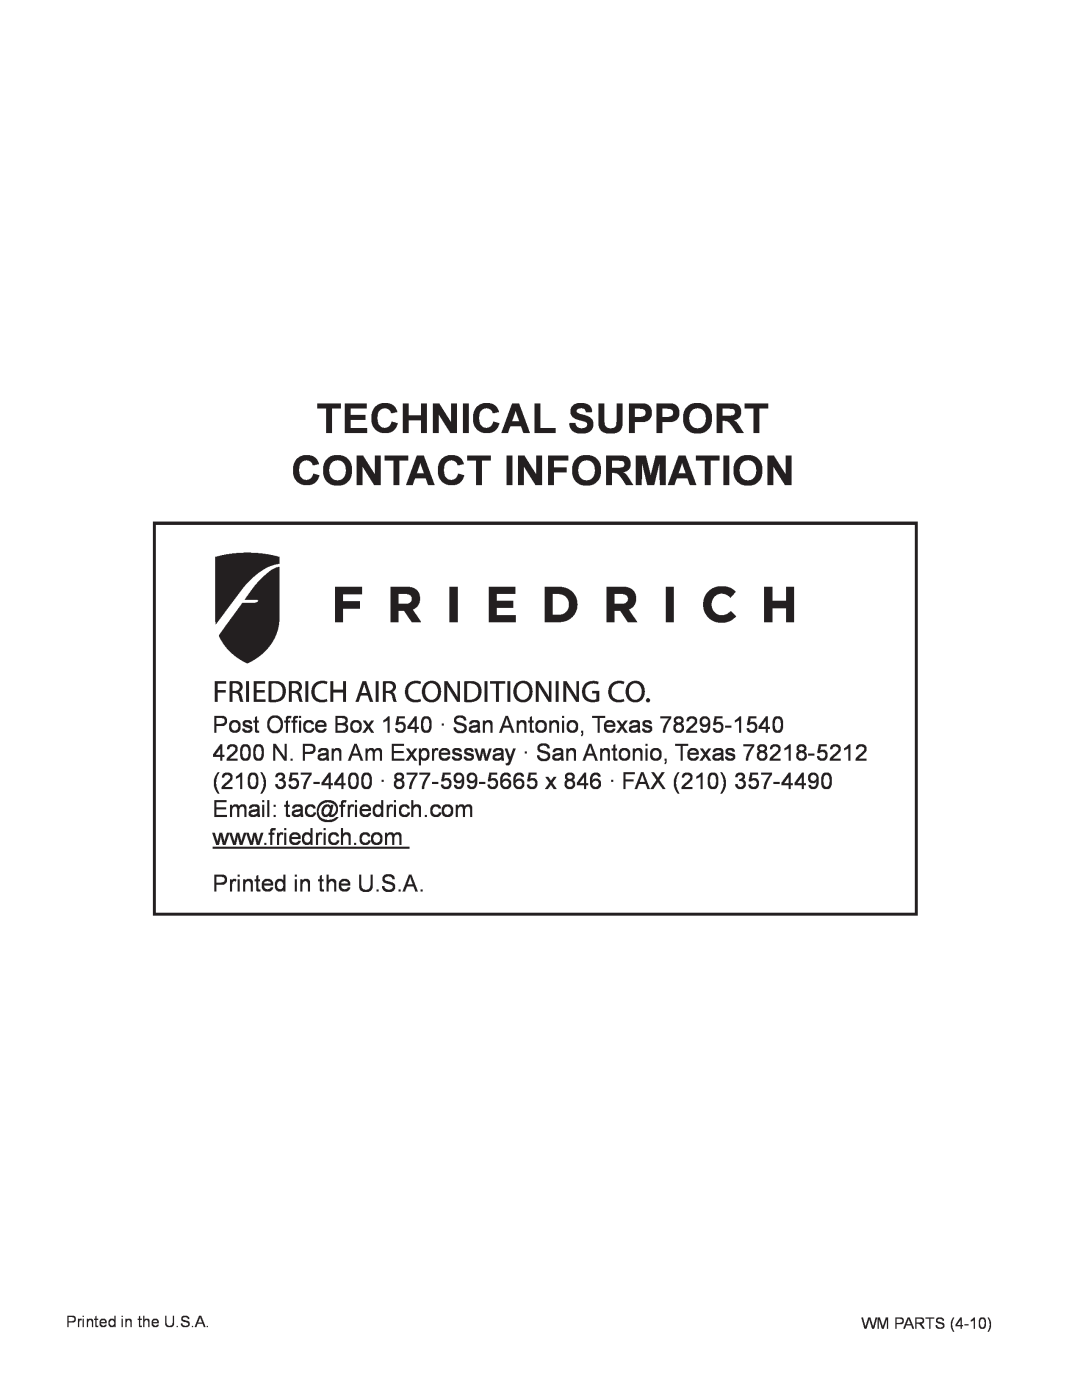 Friedrich R410A manual Technical Support Contact Information, Friedrich Air Conditioning Co, Wm Parts 